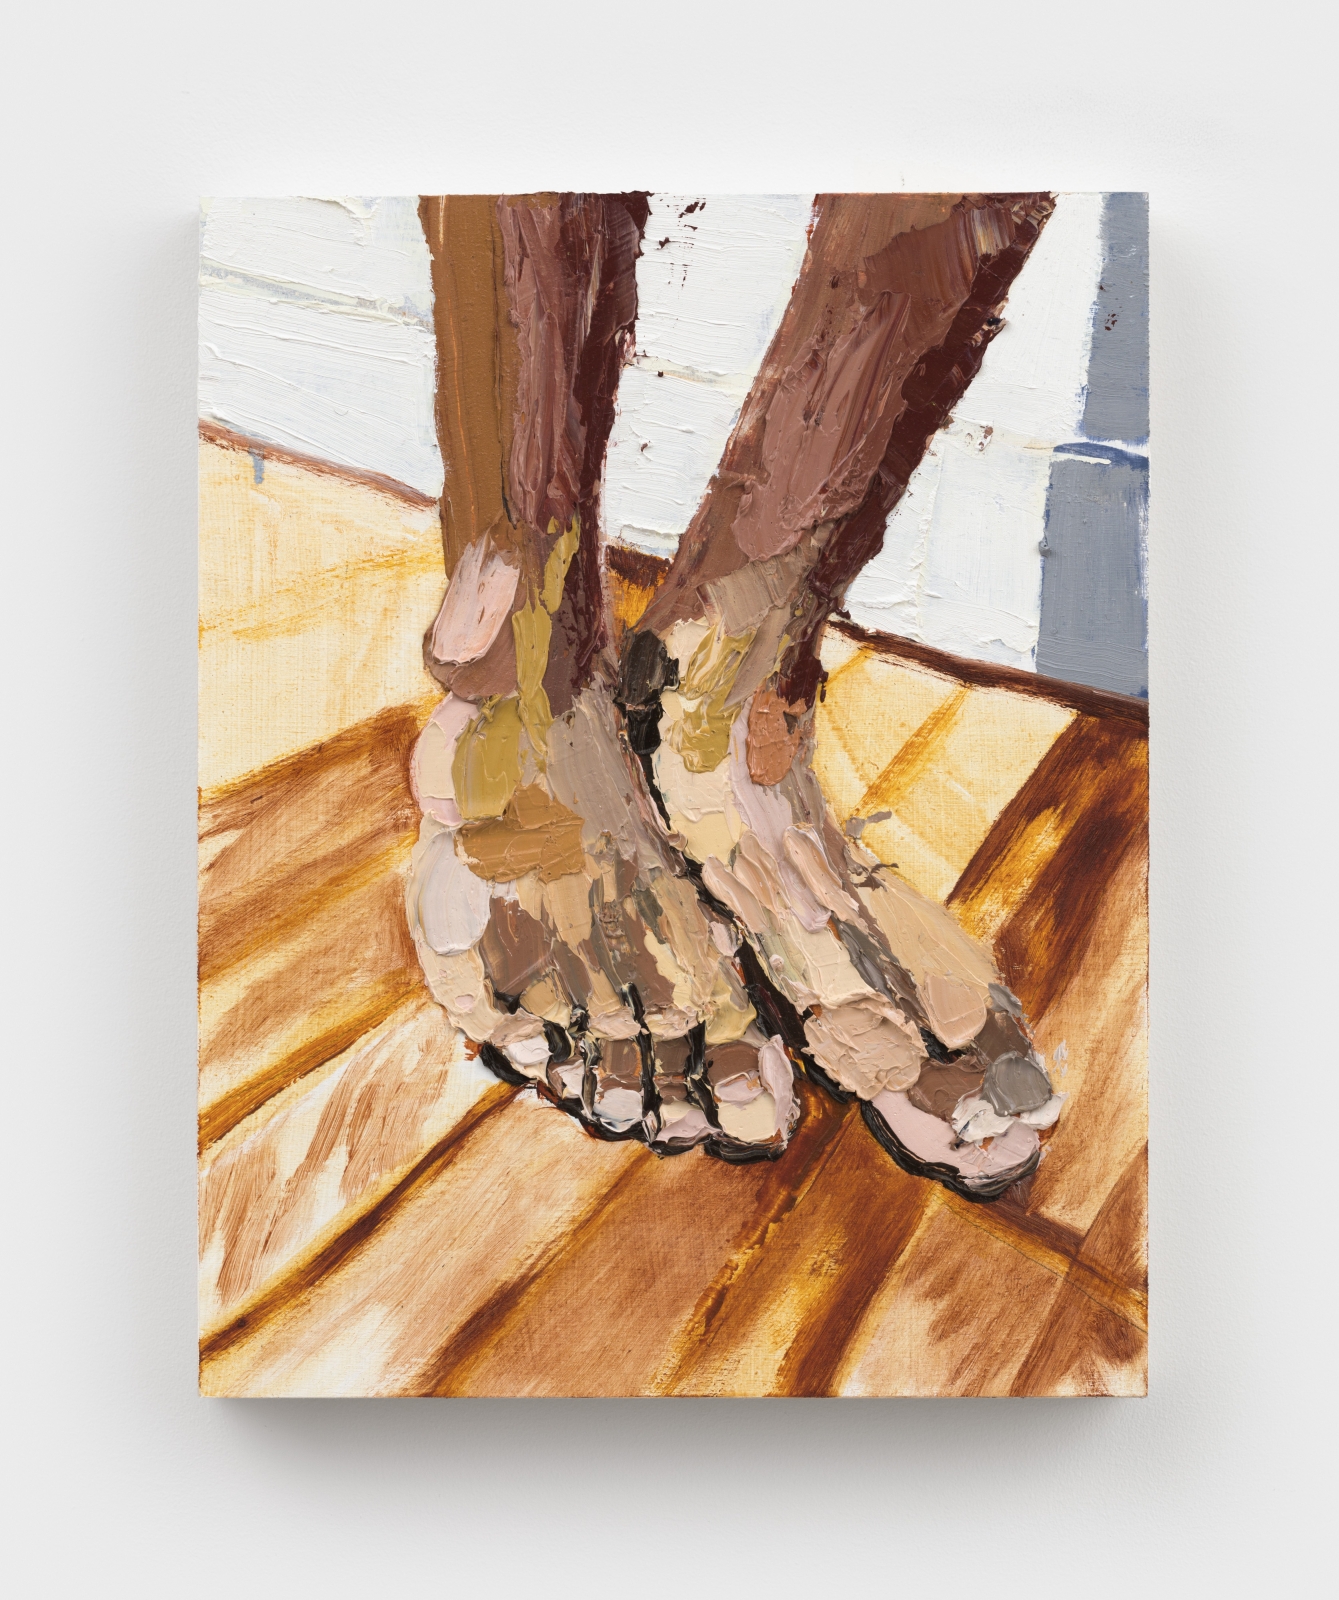 Gerald Lovell
my tiny ankles, 2021
oil on panel
14 x 11 ins.
35.6 x 27.9 cm